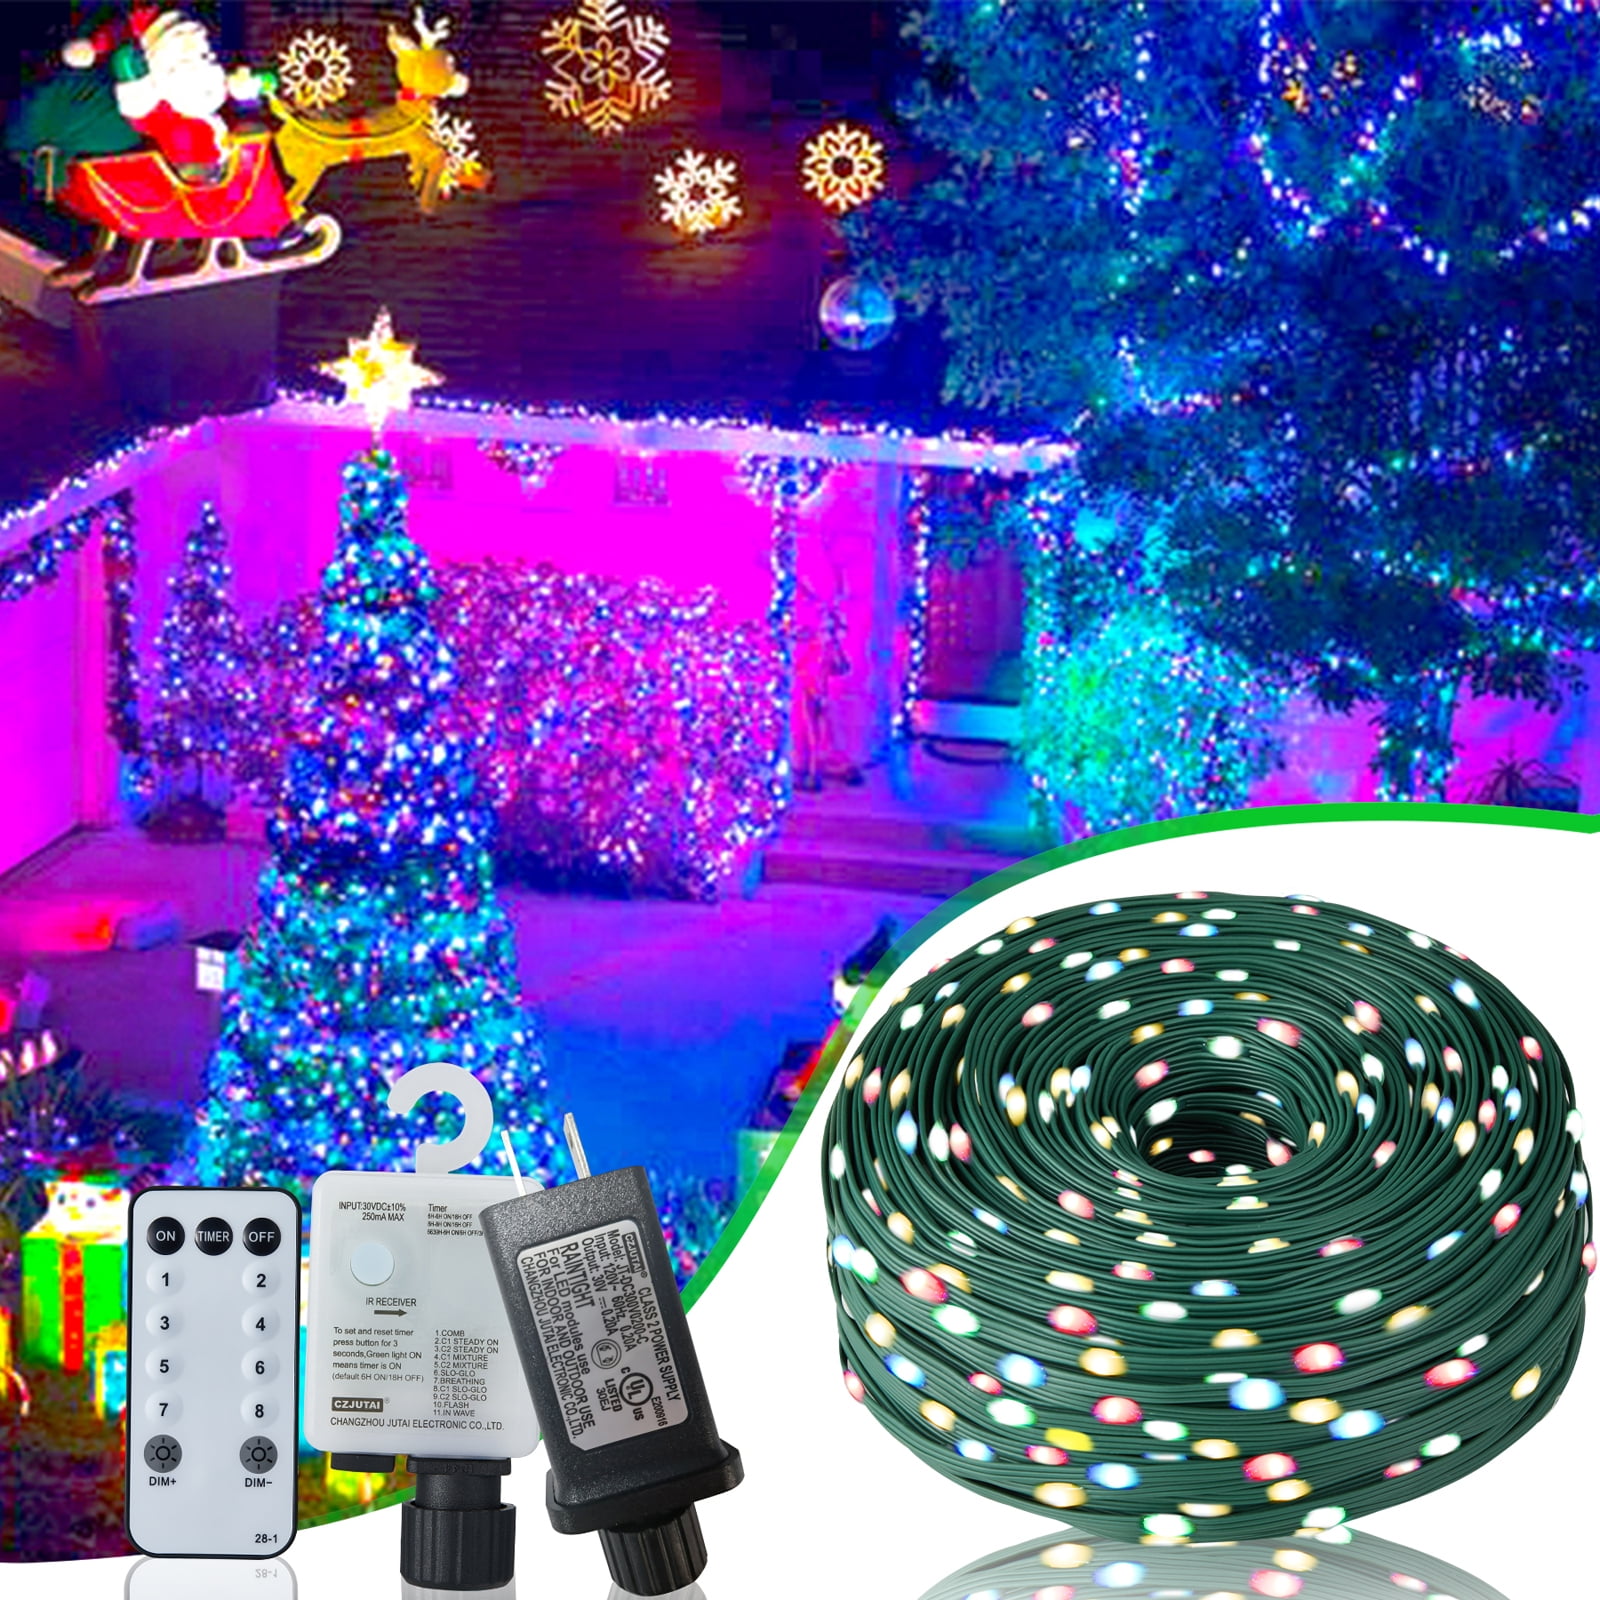 Lightshare 1000LED 328ft String Lights Warm White, 8 Modes 30V Plug in Fairy Lights with Remote Control for Home Garden Yard